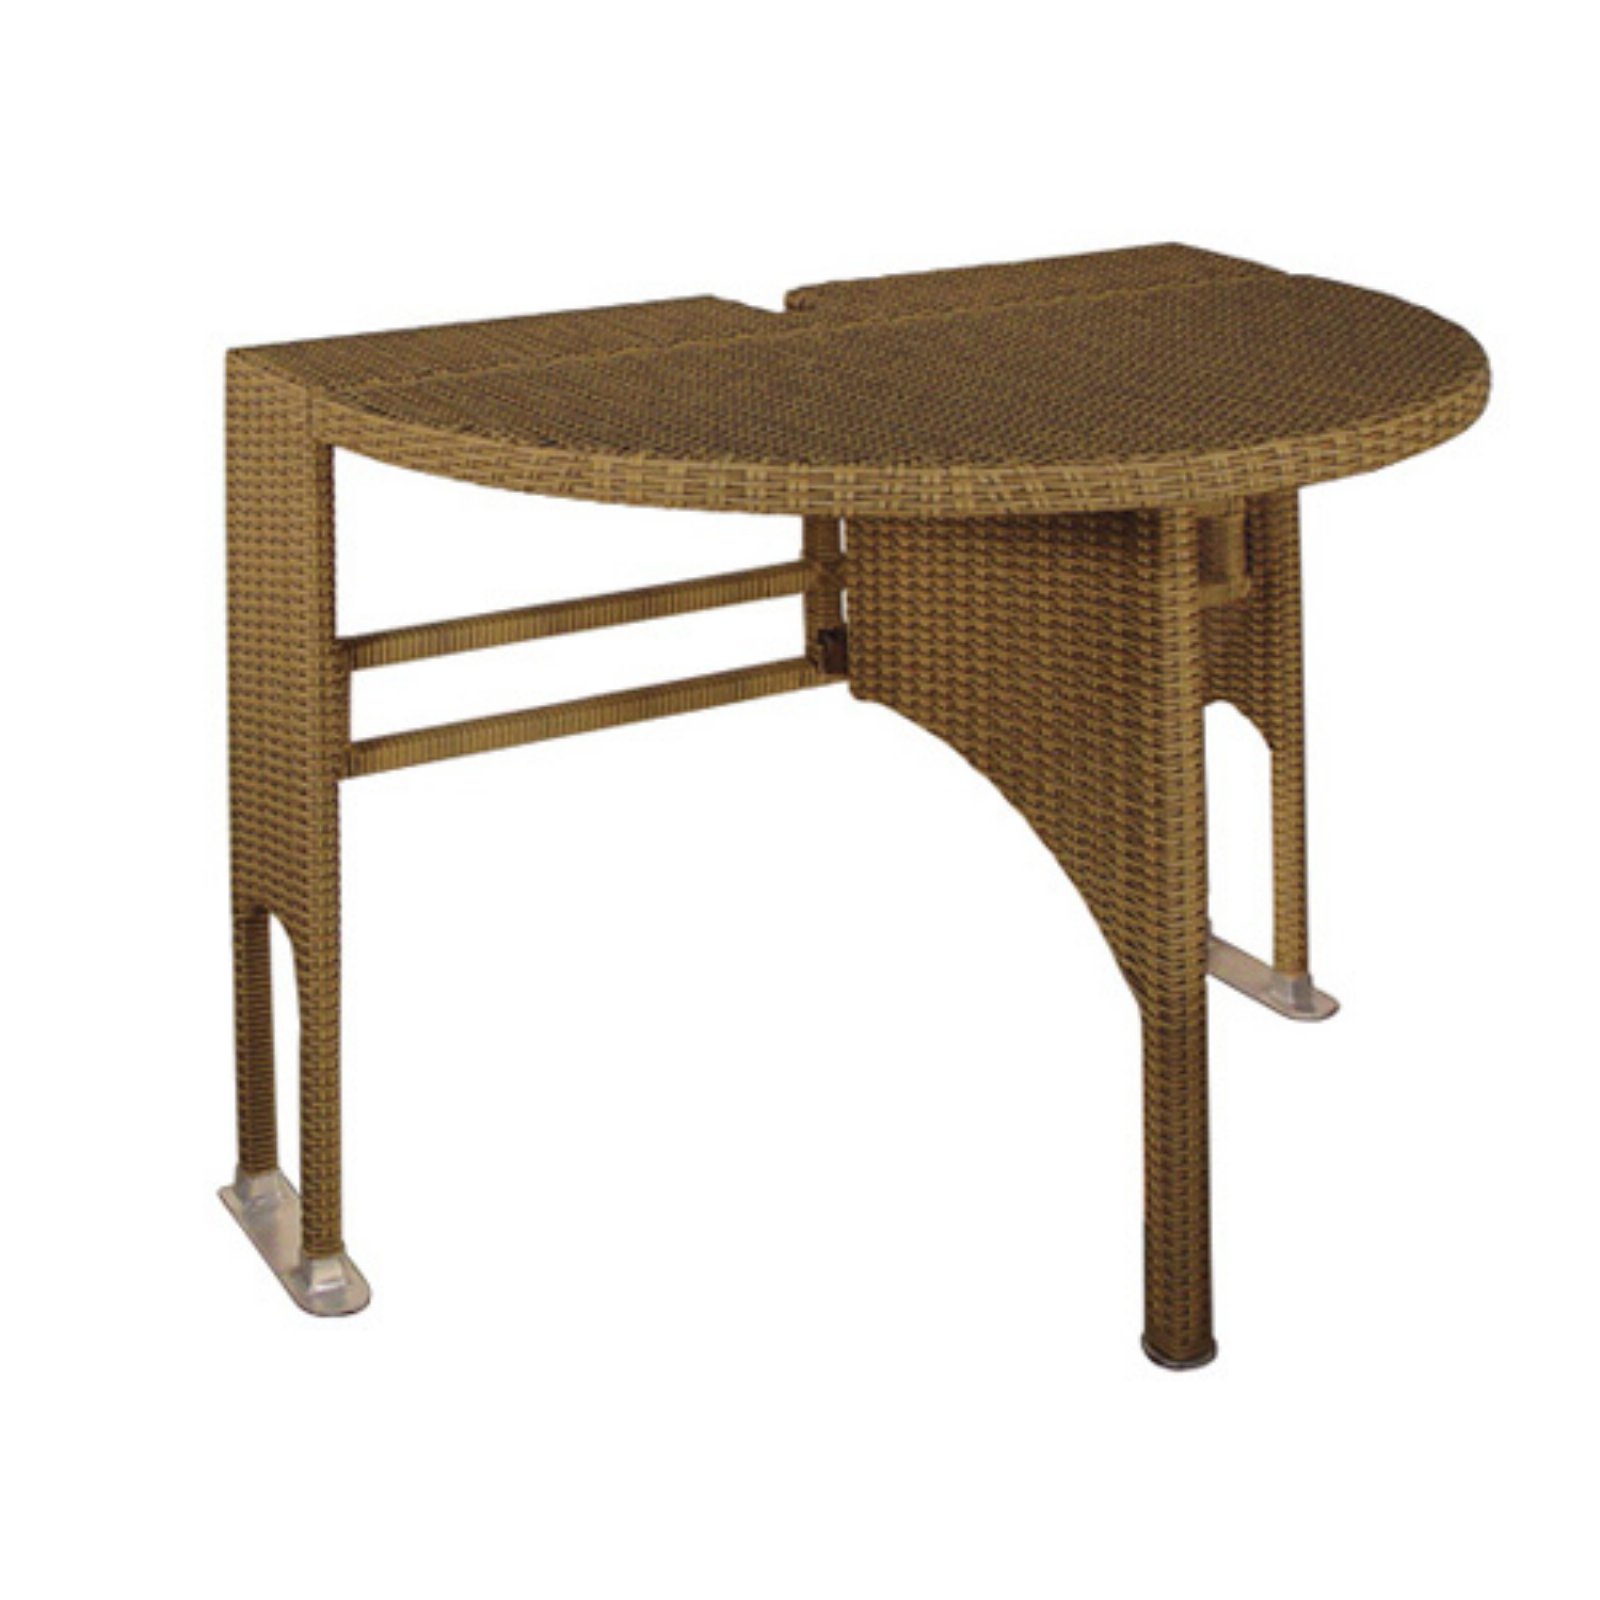 Blue Star Group Terrace Mates Adena All-Weather Wicker Coffee Color Table Set w/ 9'-Wide OFF-THE-WALL BRELLA - Forest Green Sunbrella Canopy - image 3 of 9